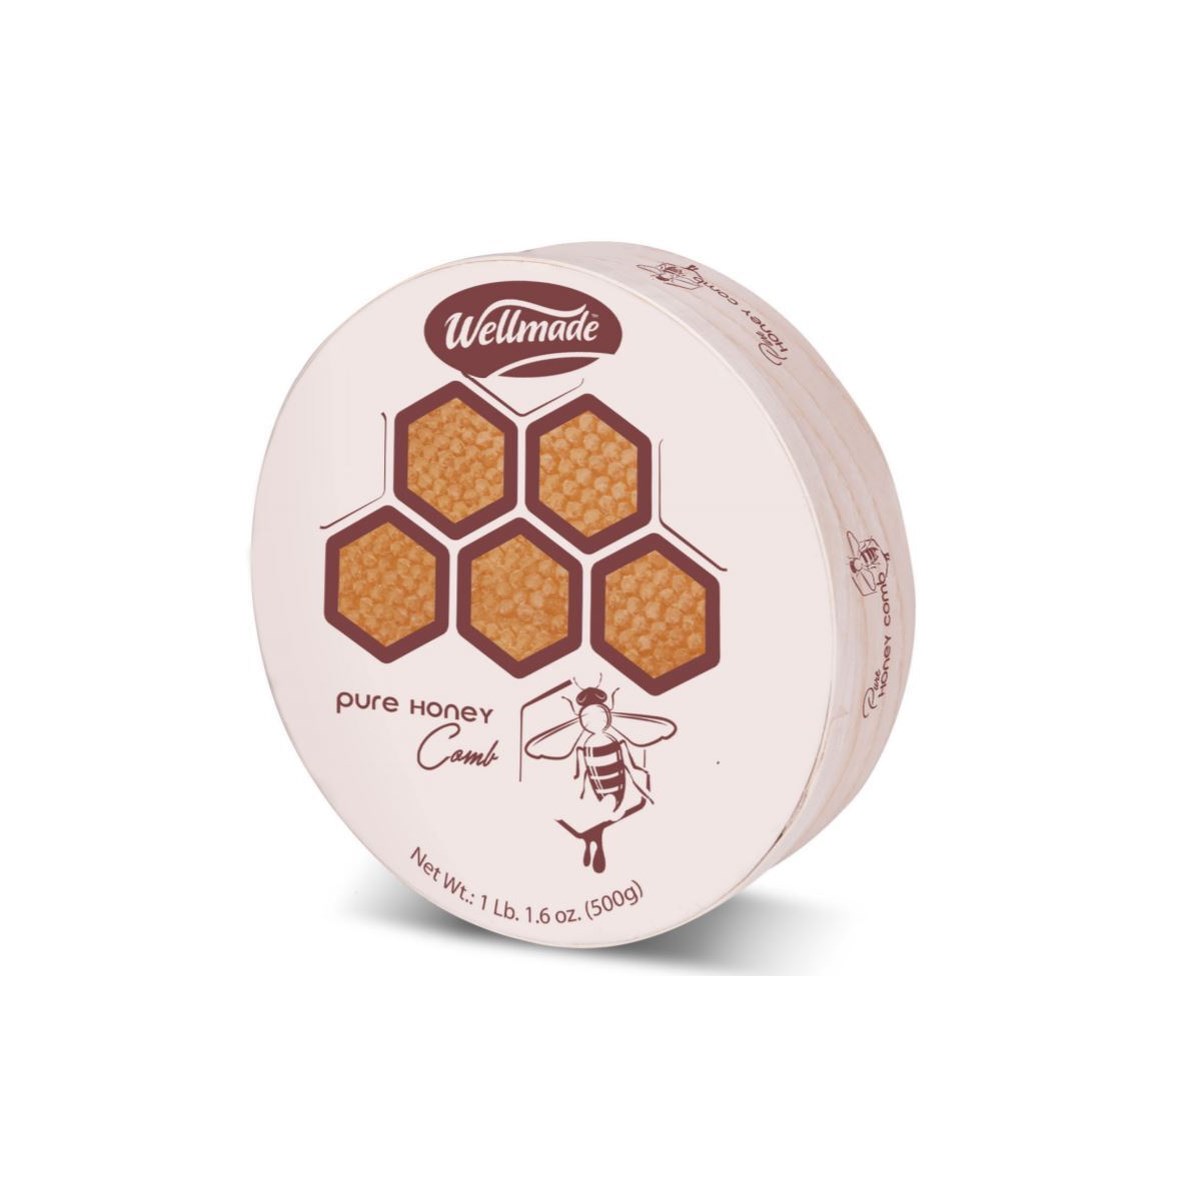 Honeycomb in wooden round package "Wellmade"" 500g